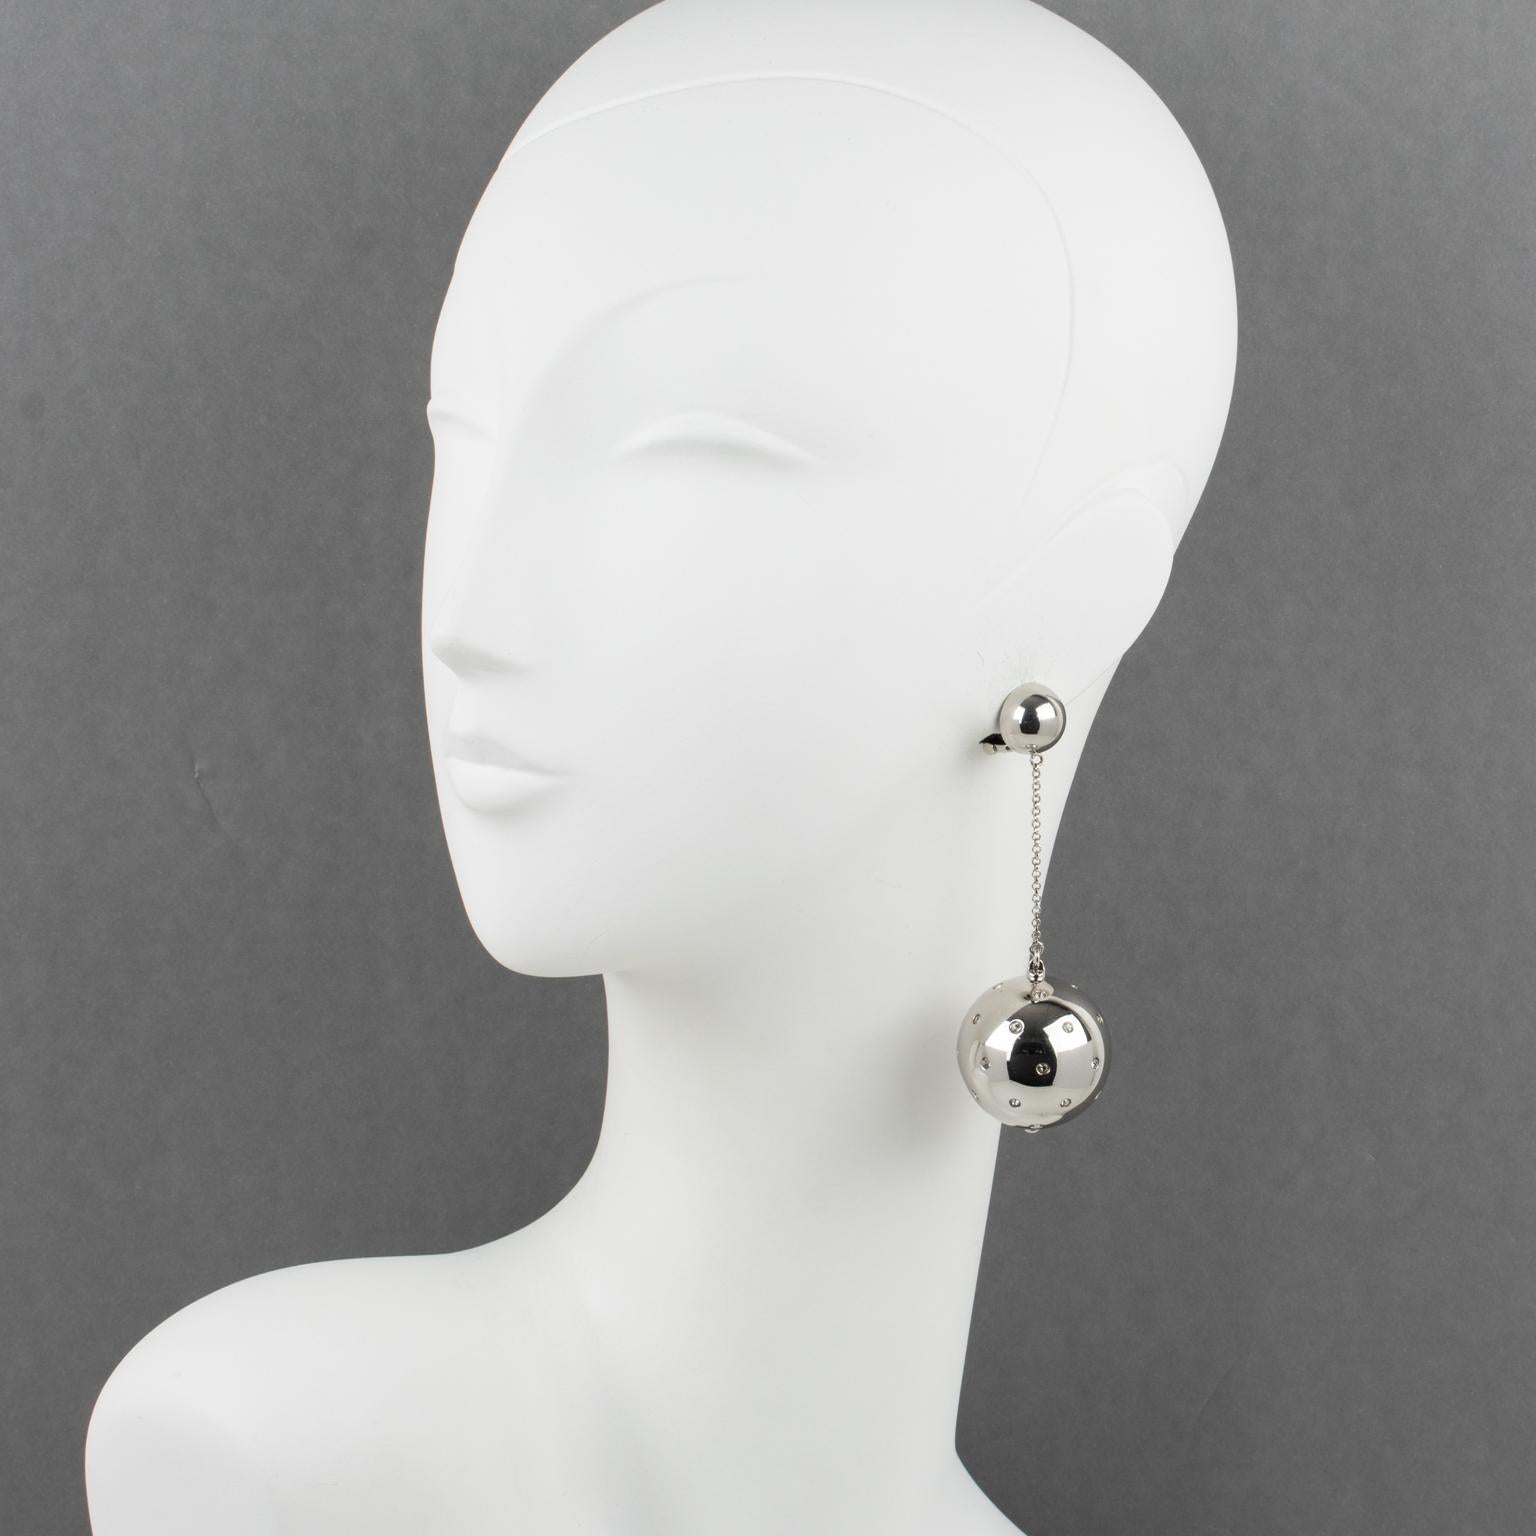 Stunning oversized dangling clip-on earrings designed by Prada, Italy. These simple yet elegant earrings will make you shine no matter what the occasion is. They come from the house of Prada. This pair is designed in a clip-on style with a heavy